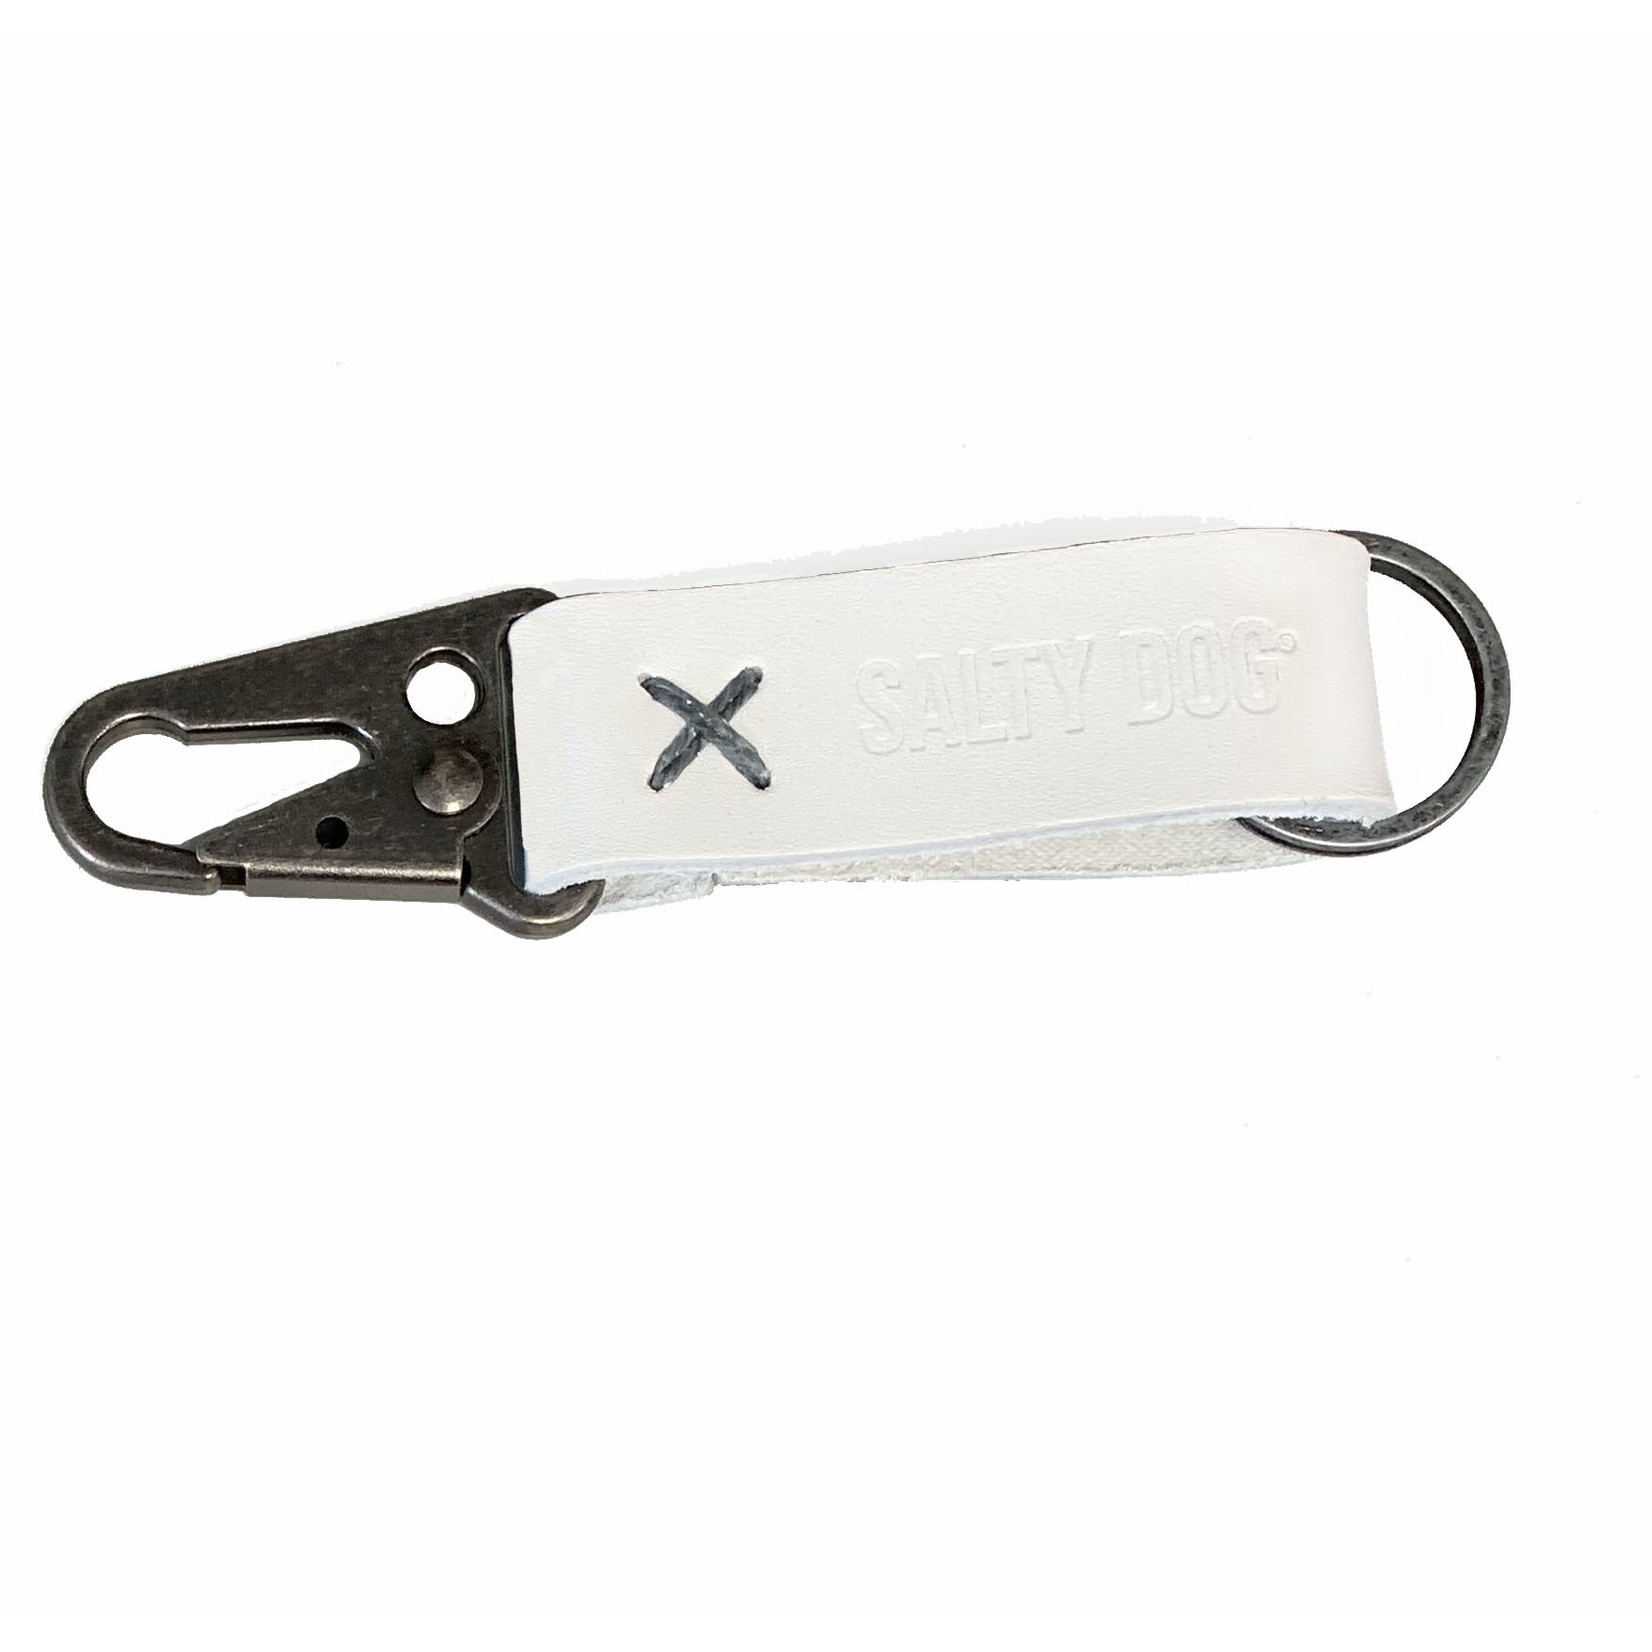 Key Chain - Leather Carabiner, White